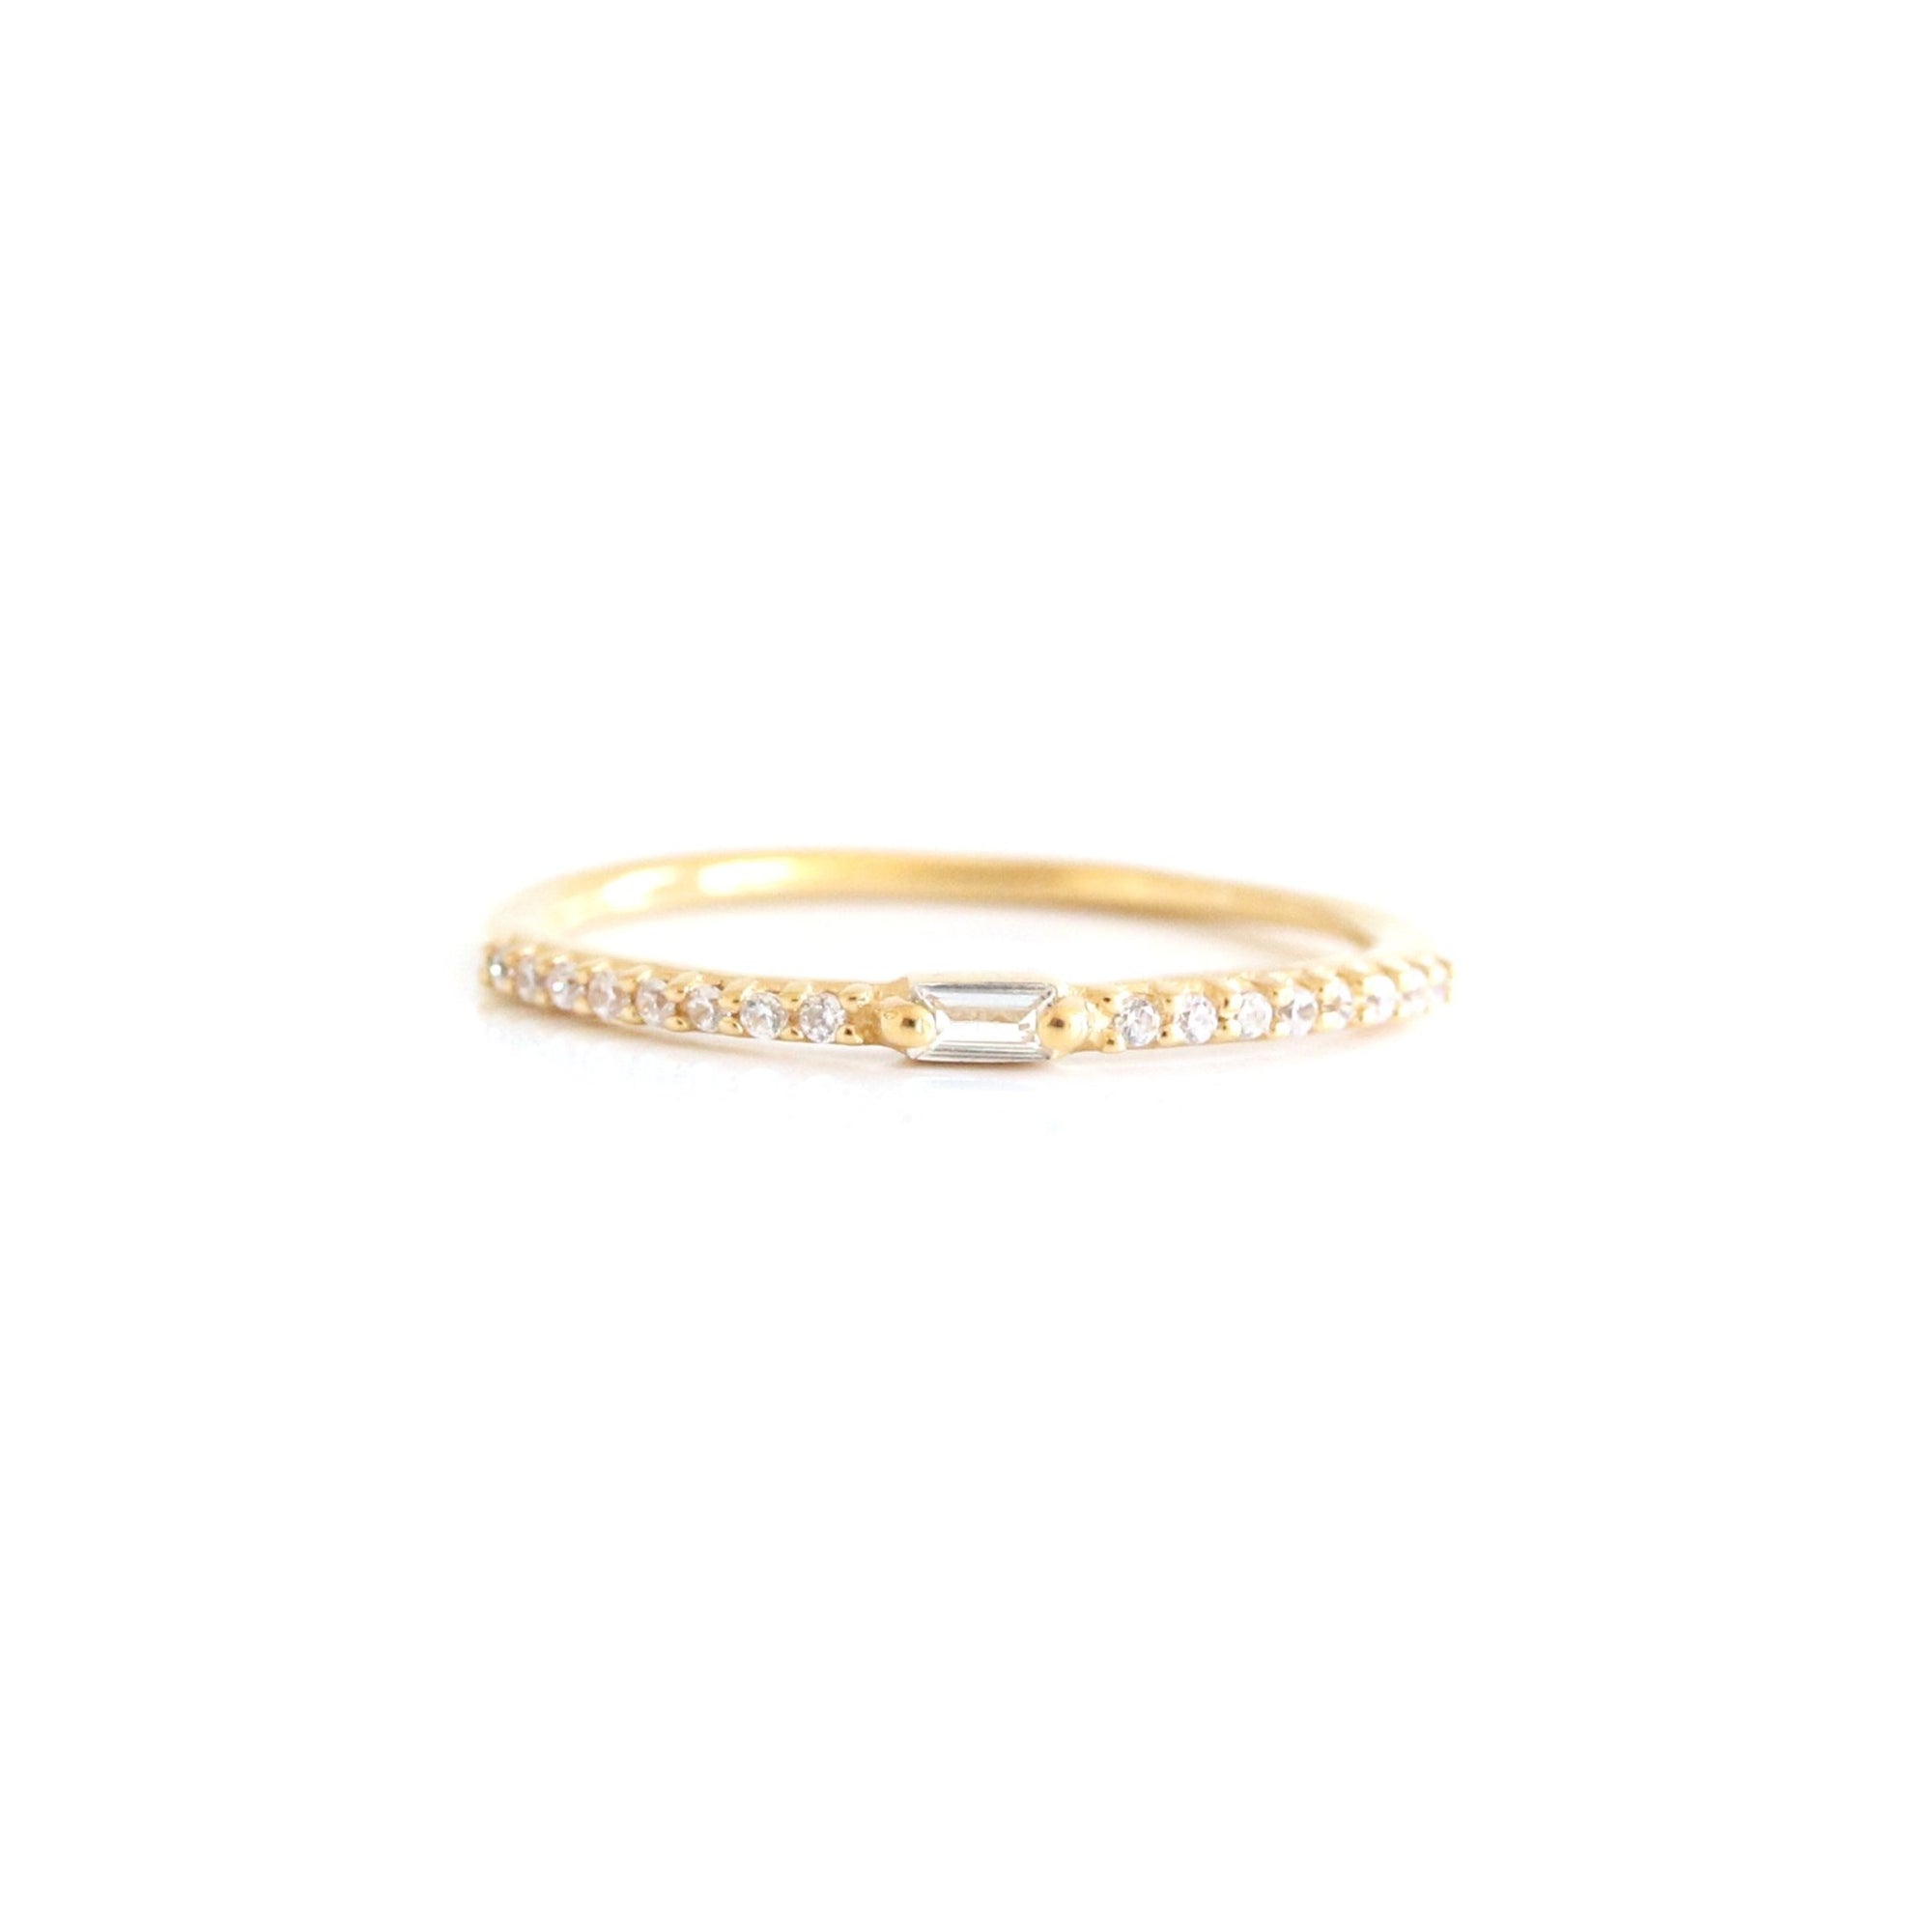 Loyal Prism Stacking Ring - White Topaz & Gold - SO PRETTY CARA COTTER